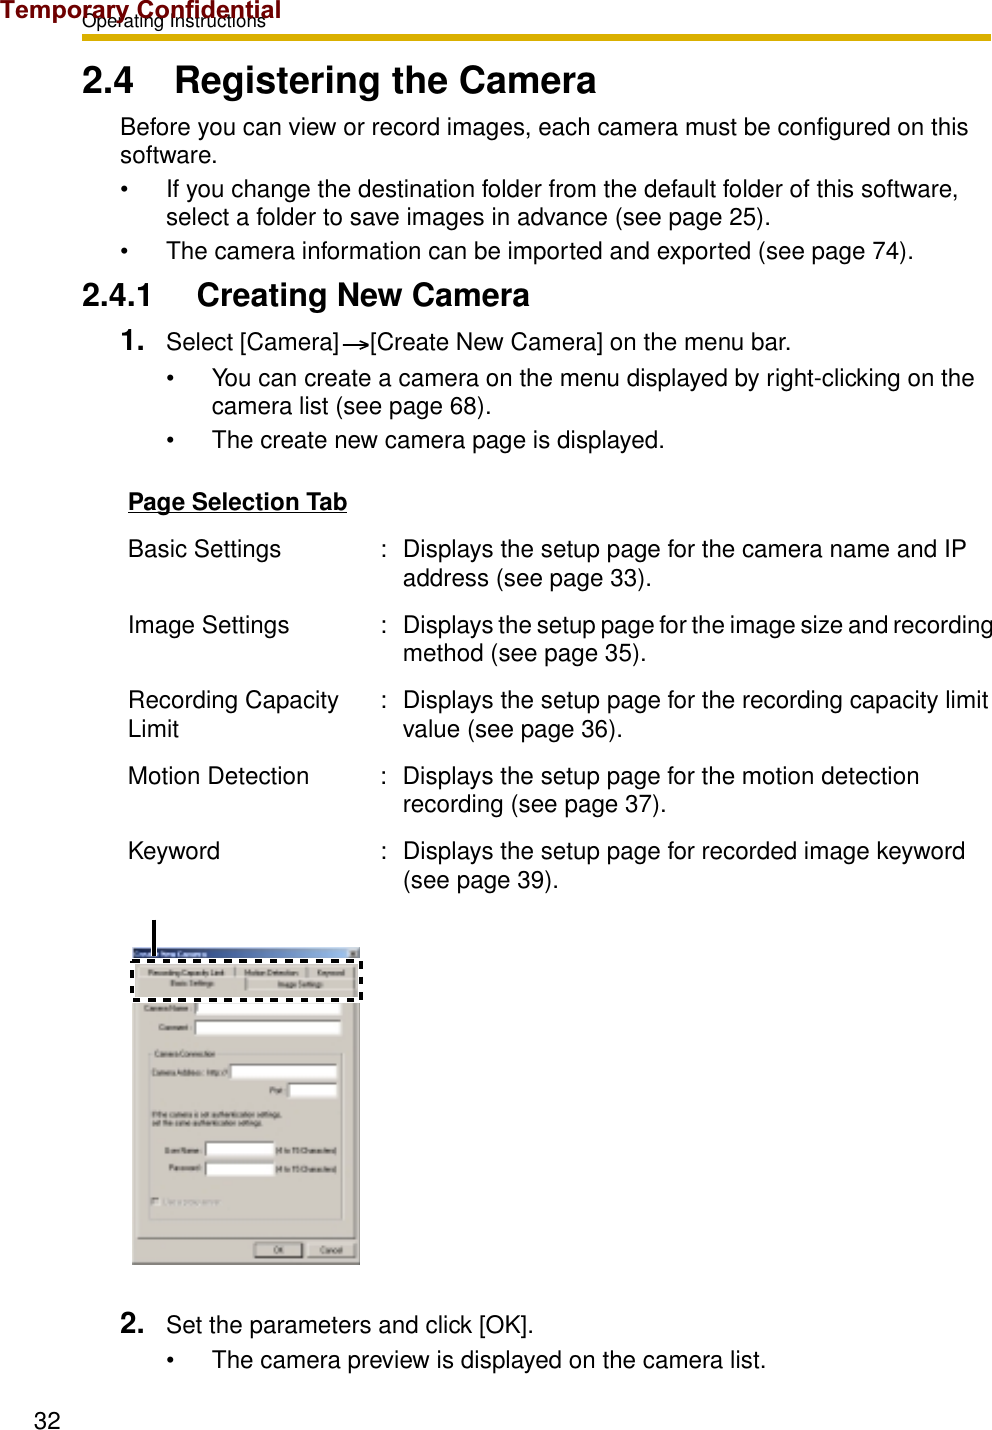 Operating Instructions322.4 Registering the CameraBefore you can view or record images, each camera must be configured on this software.• If you change the destination folder from the default folder of this software, select a folder to save images in advance (see page 25).• The camera information can be imported and exported (see page 74).2.4.1 Creating New Camera1. Select [Camera] [Create New Camera] on the menu bar.• You can create a camera on the menu displayed by right-clicking on the camera list (see page 68).• The create new camera page is displayed.2. Set the parameters and click [OK].• The camera preview is displayed on the camera list.Page Selection TabBasic Settings : Displays the setup page for the camera name and IP address (see page 33).Image Settings : Displays the setup page for the image size and recording method (see page 35).Recording Capacity Limit : Displays the setup page for the recording capacity limit value (see page 36).Motion Detection : Displays the setup page for the motion detection recording (see page 37).Keyword : Displays the setup page for recorded image keyword (see page 39).Temporary Confidential